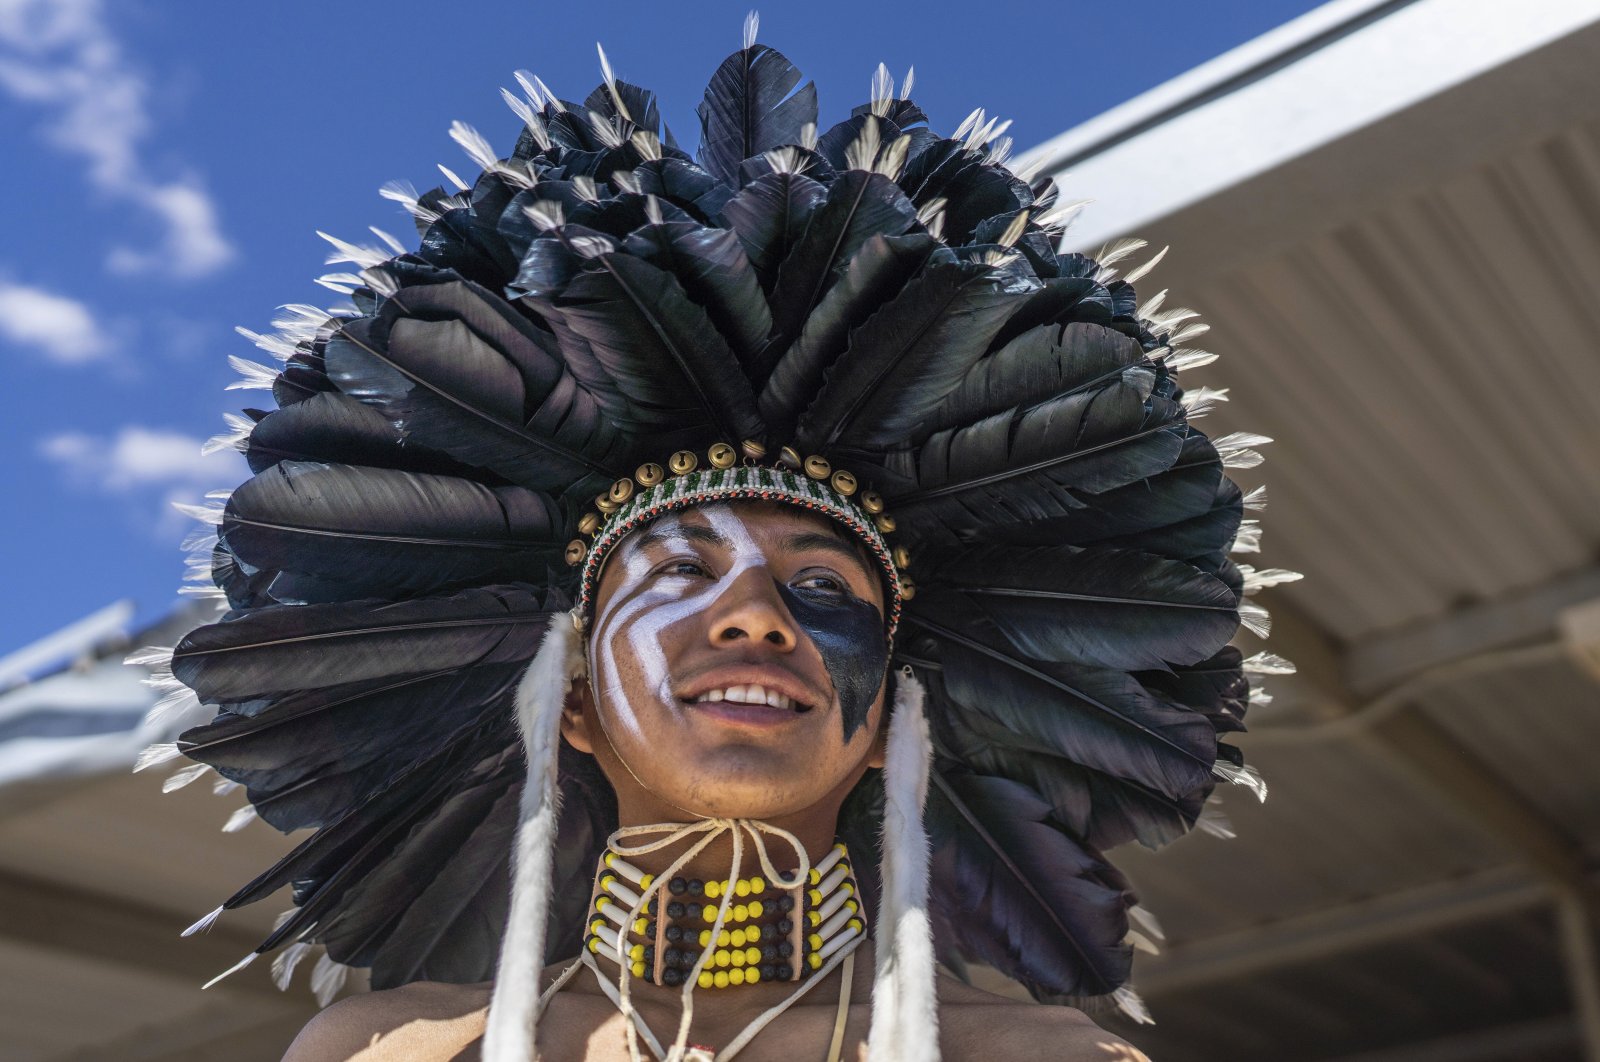 Tommy Sam of Rio Rancho, New Mexico who is Navajo prepares to ride his horse in the horse parade at the 40th anniversary of the Gathering of Nations Pow Wow in Albuquerque, New Mexico, U.S., April 28, 2023. (AP Photo)